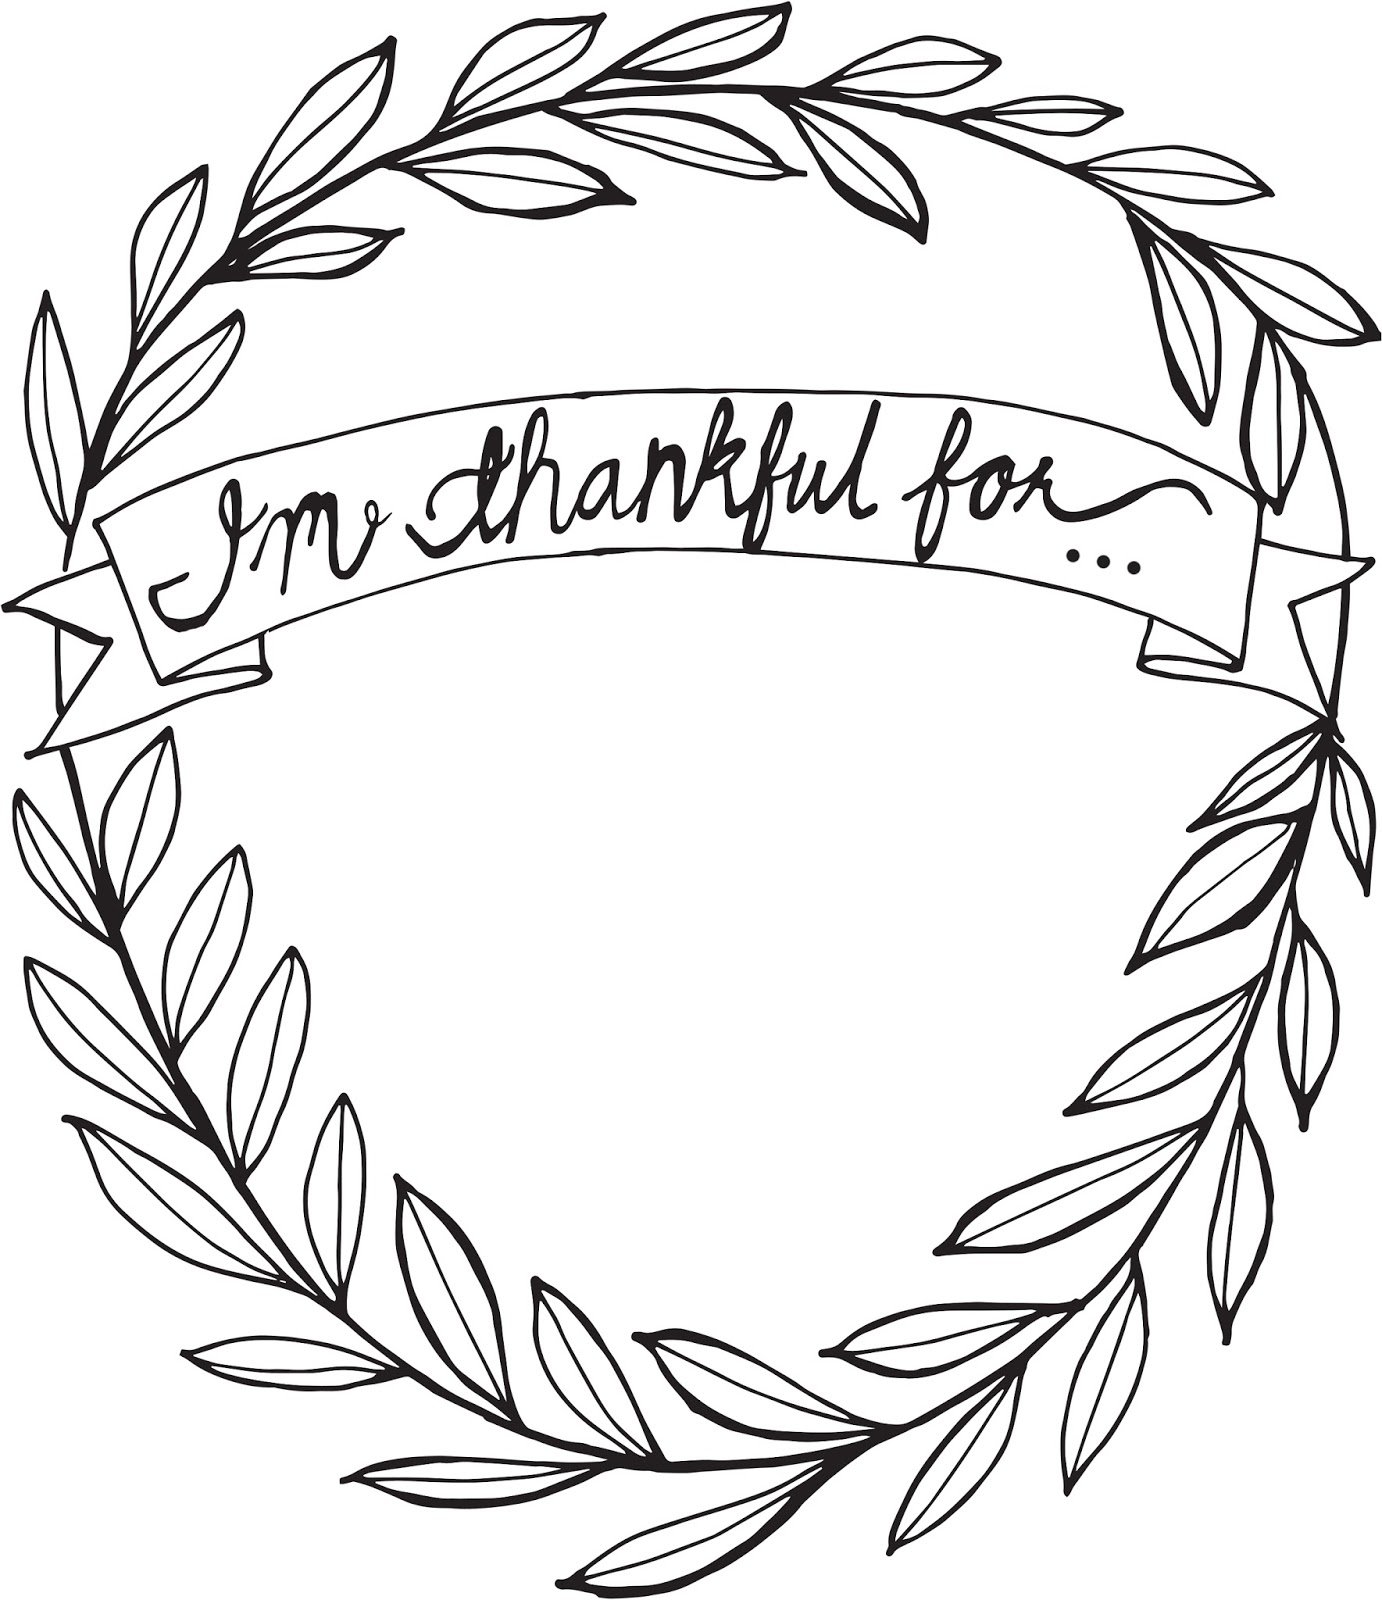 I'm Thankful For free Thanksgiving printable - Sisters, What!